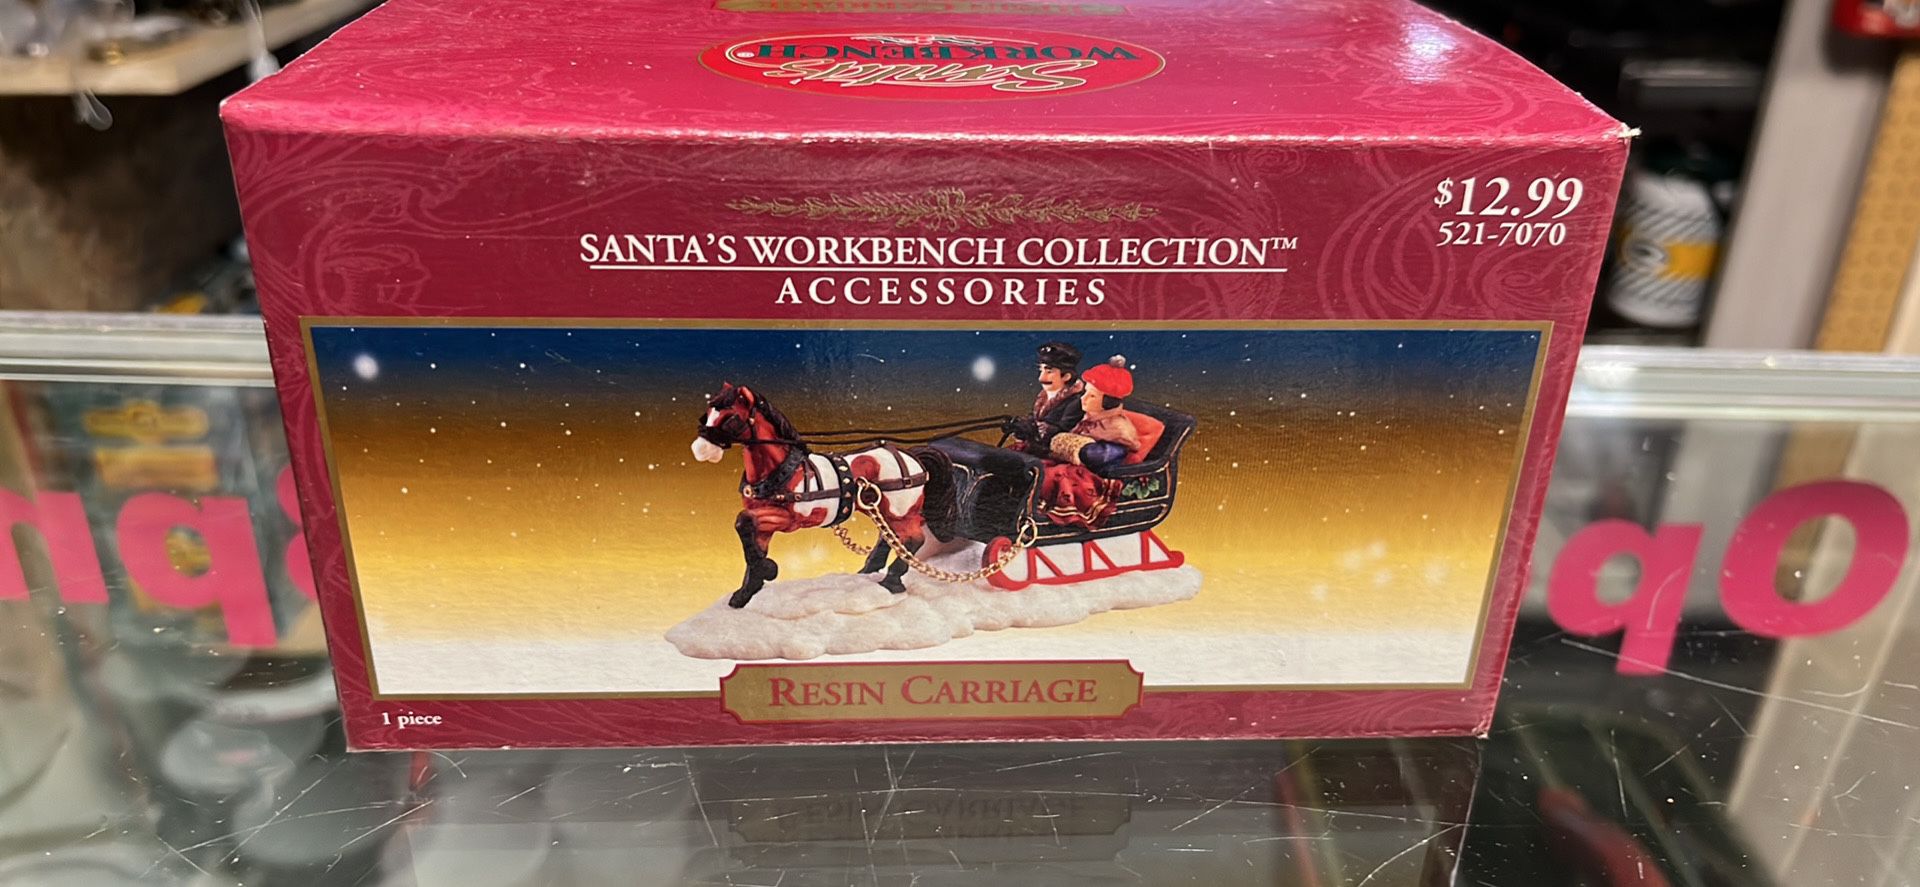 Santas workbench collection Accessories  Resin Carriade 